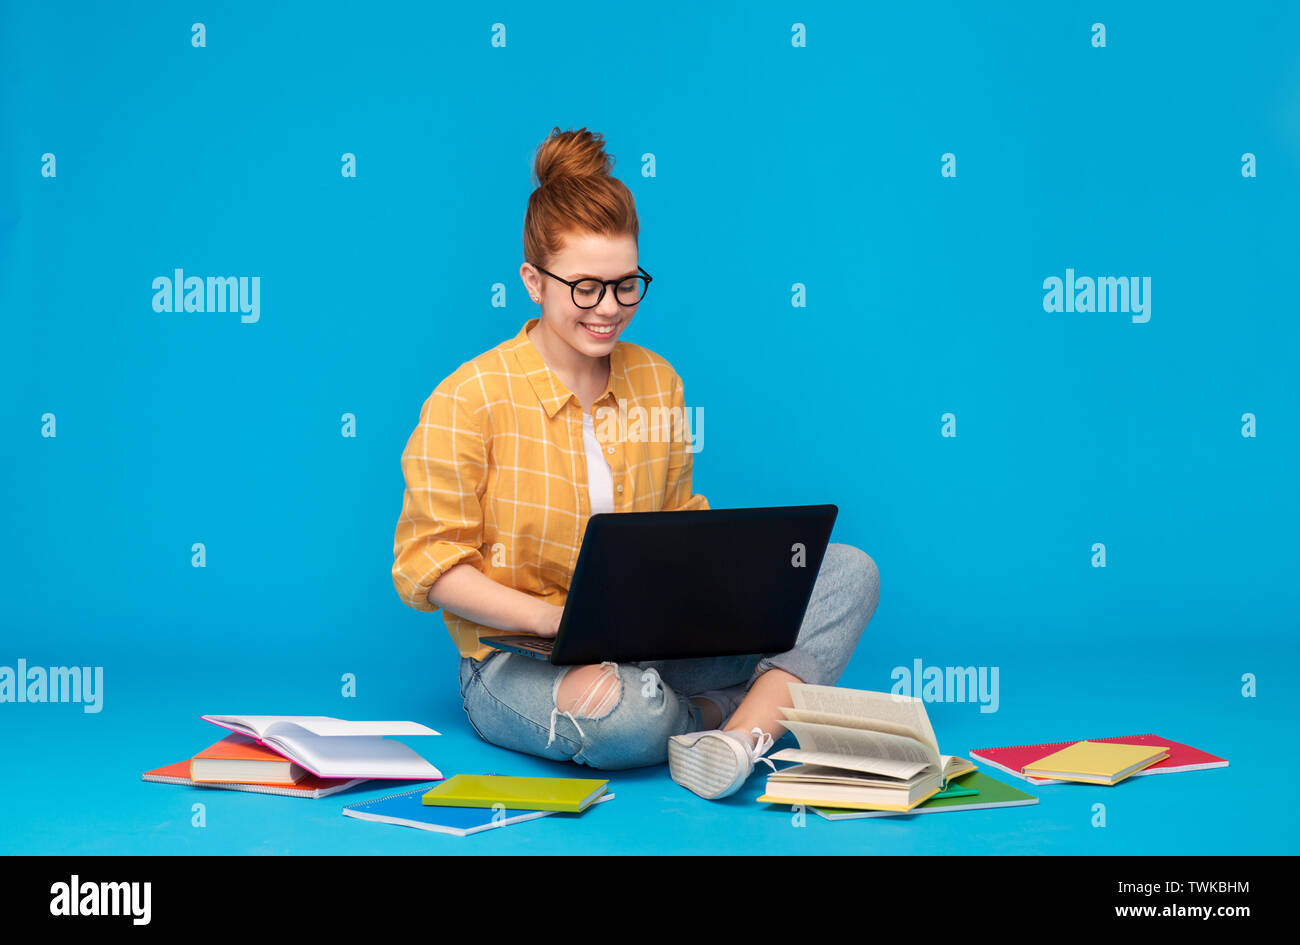 Red haired girl teenage student with laptop Banque D'Images